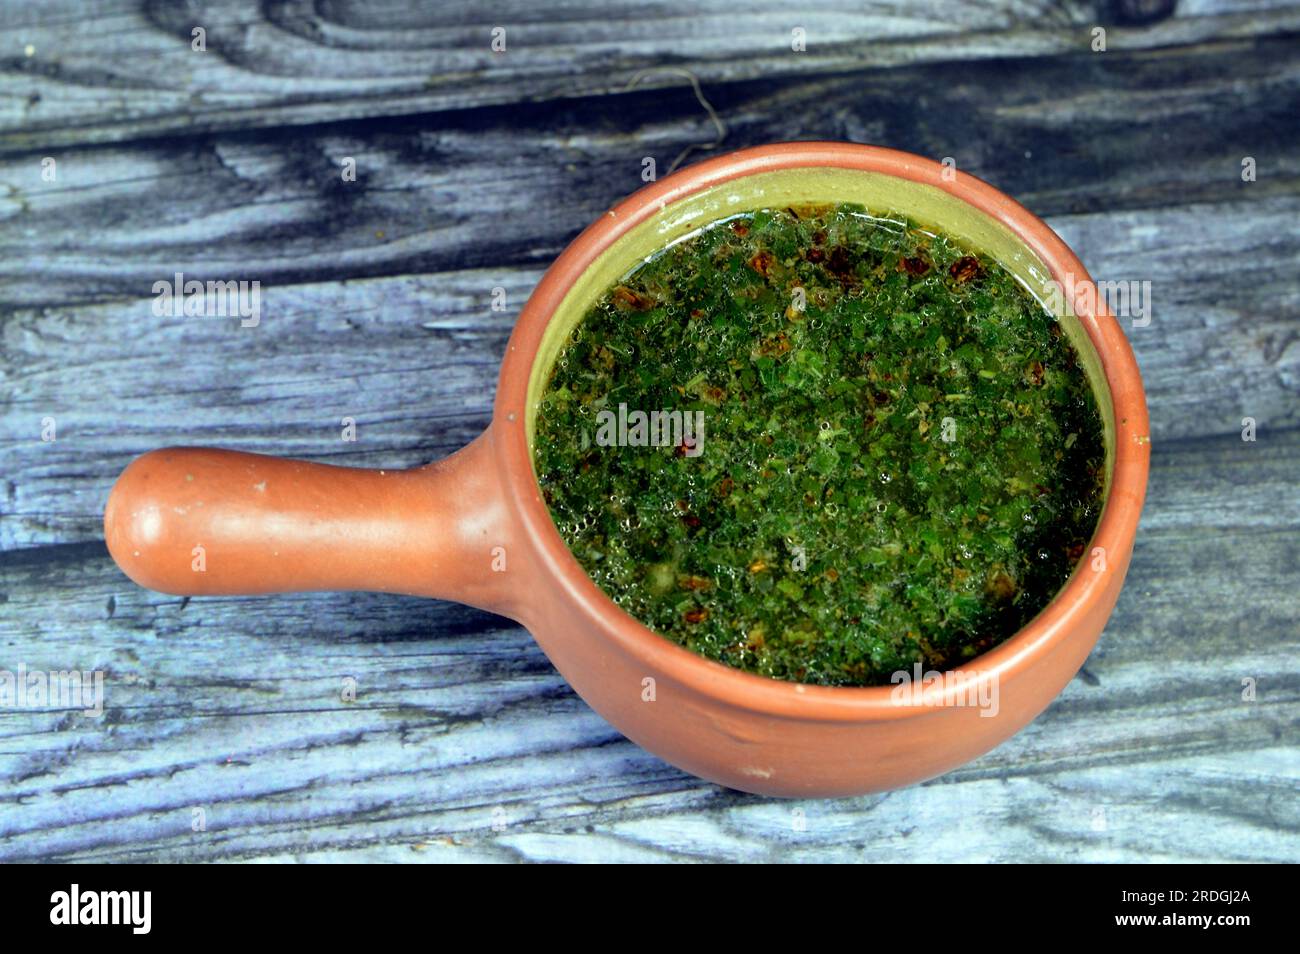 Mulukhiyah, also known as molokhia, molohiya or ewedu, a dish made from the leaves of Corchorus olitorius, commonly known in English as denje'c'jute, Stock Photo